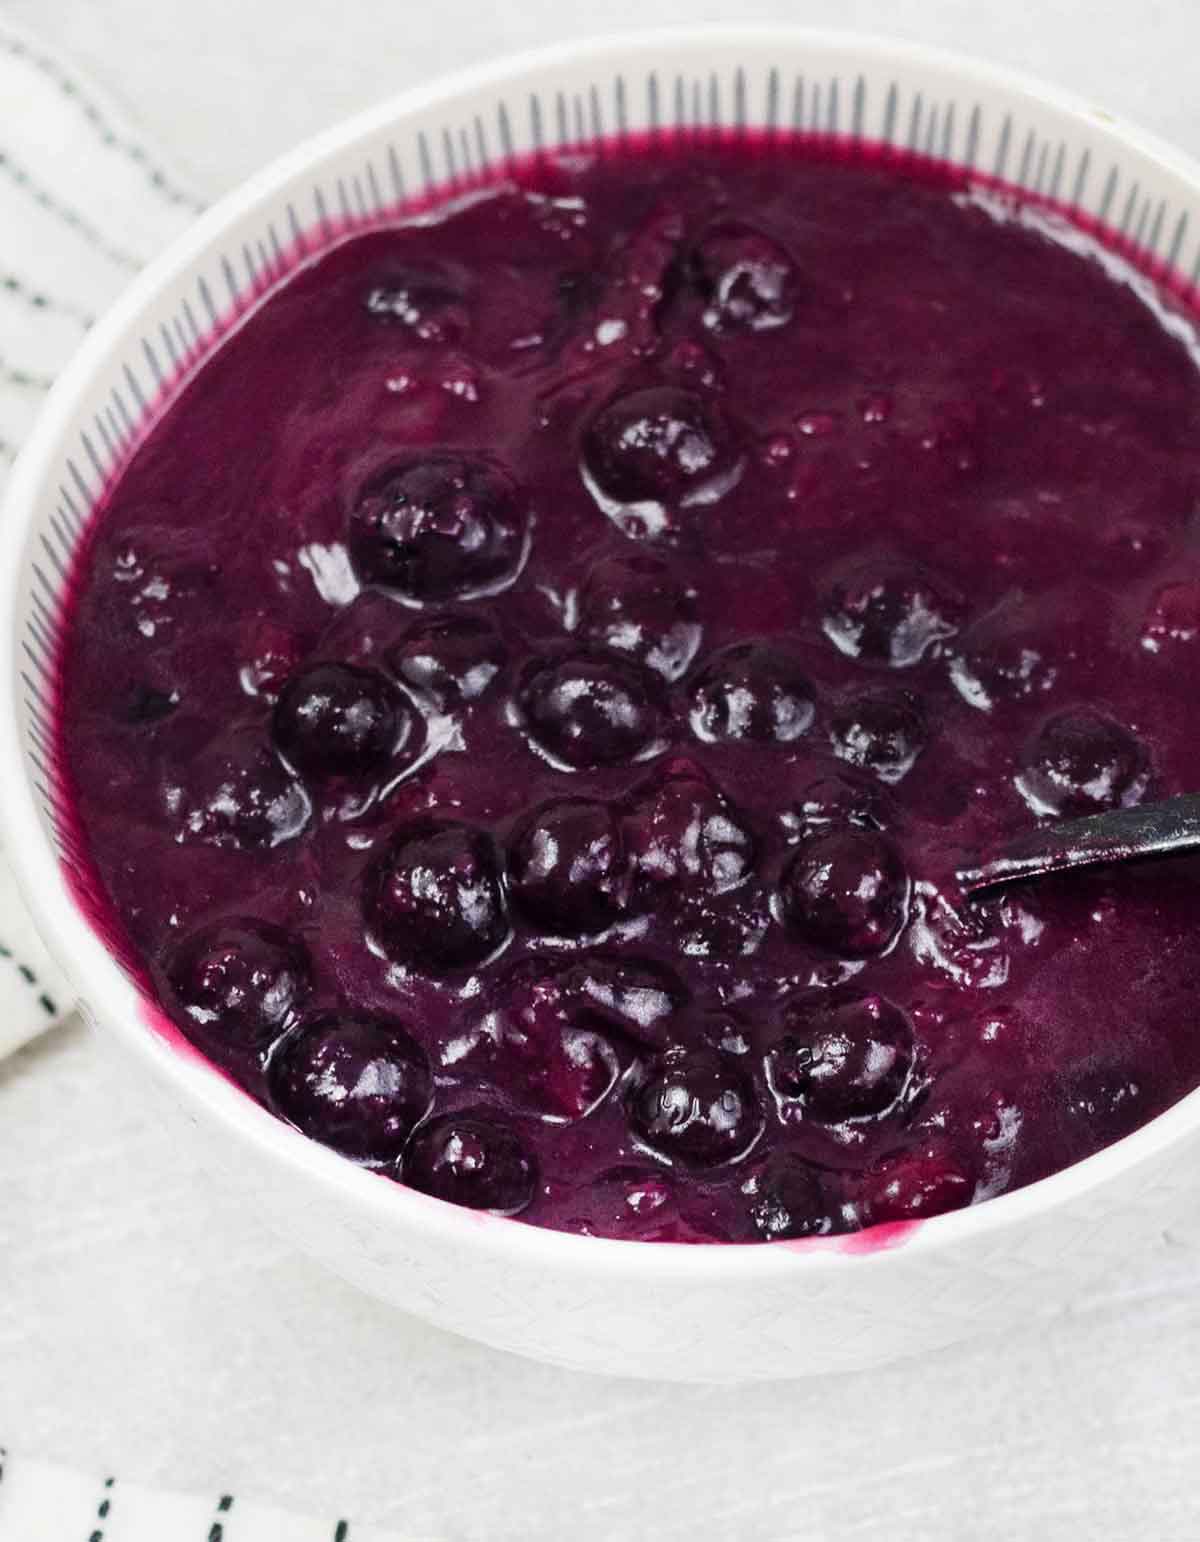 A spoonful of homemade blueberry cake filling.